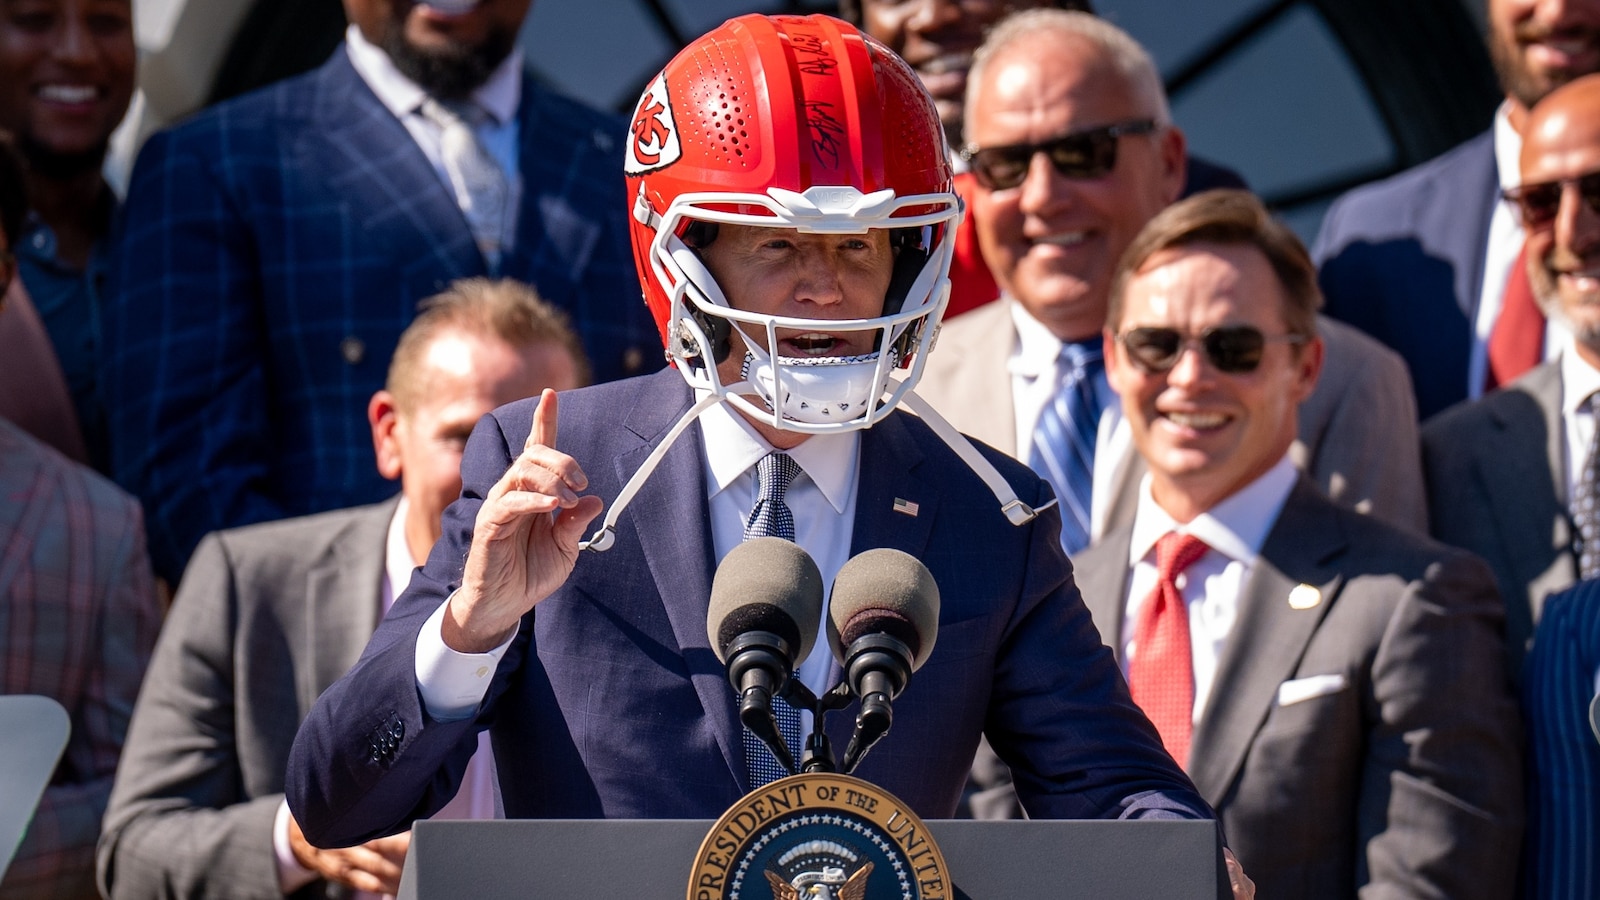 Biden hams it up with Super Bowl champs, Kansas City Chiefs at White